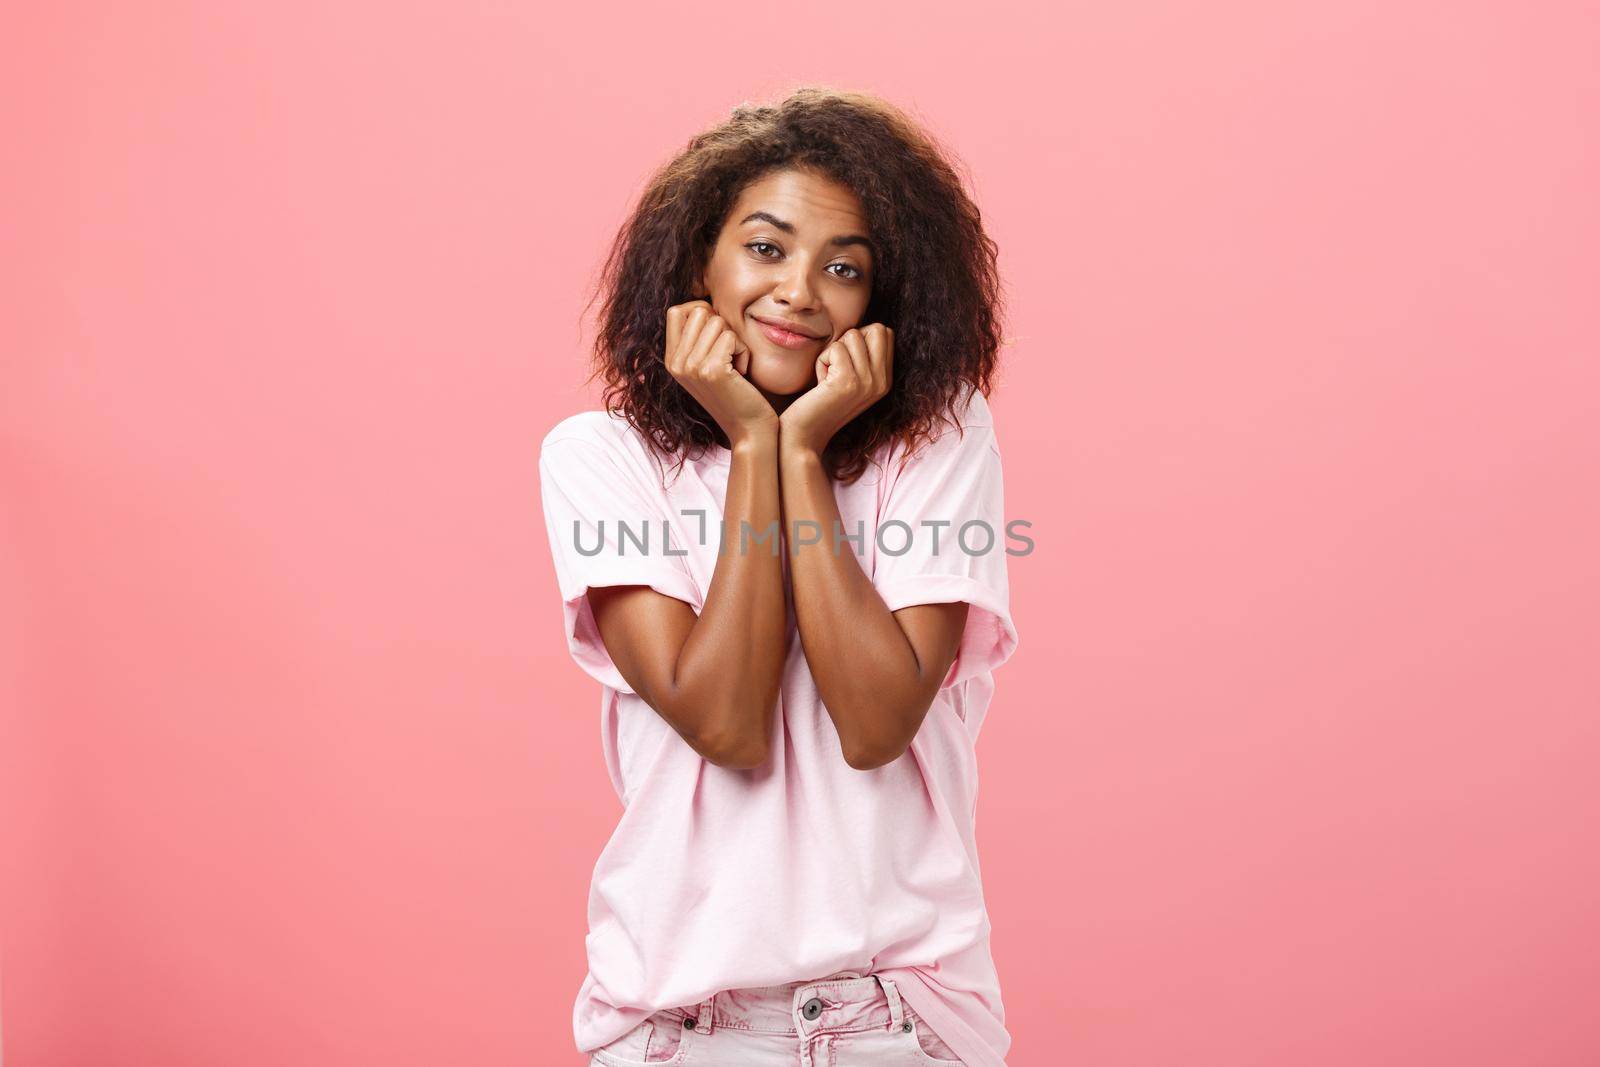 Dreamy nostalgic african american girlfriend with curly hairstyle sighing leaning head on palms and smiling gently as if imaging or gazing at boyfriend with affection having feelings for friend. Lifestyle.